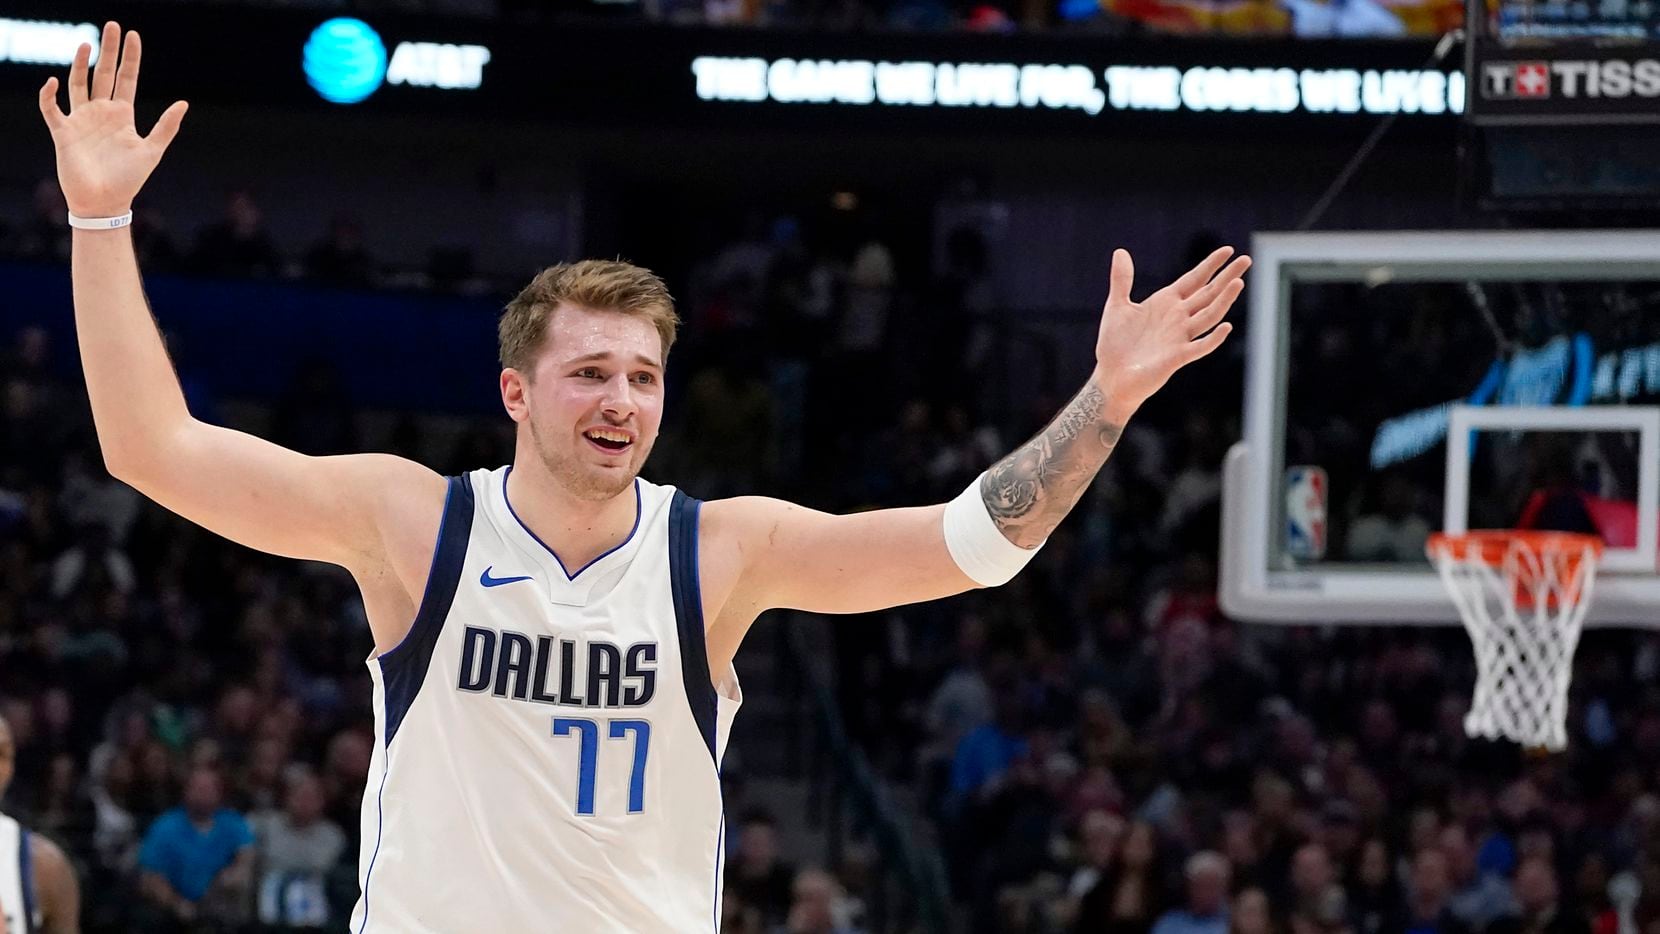 Dallas Mavericks guard Luka Doncic (77) argues for a call during the first half of an NBA basketball game against the Toronto Raptors at American Airlines Center on Saturday, Nov. 16, 2019, in Dallas.